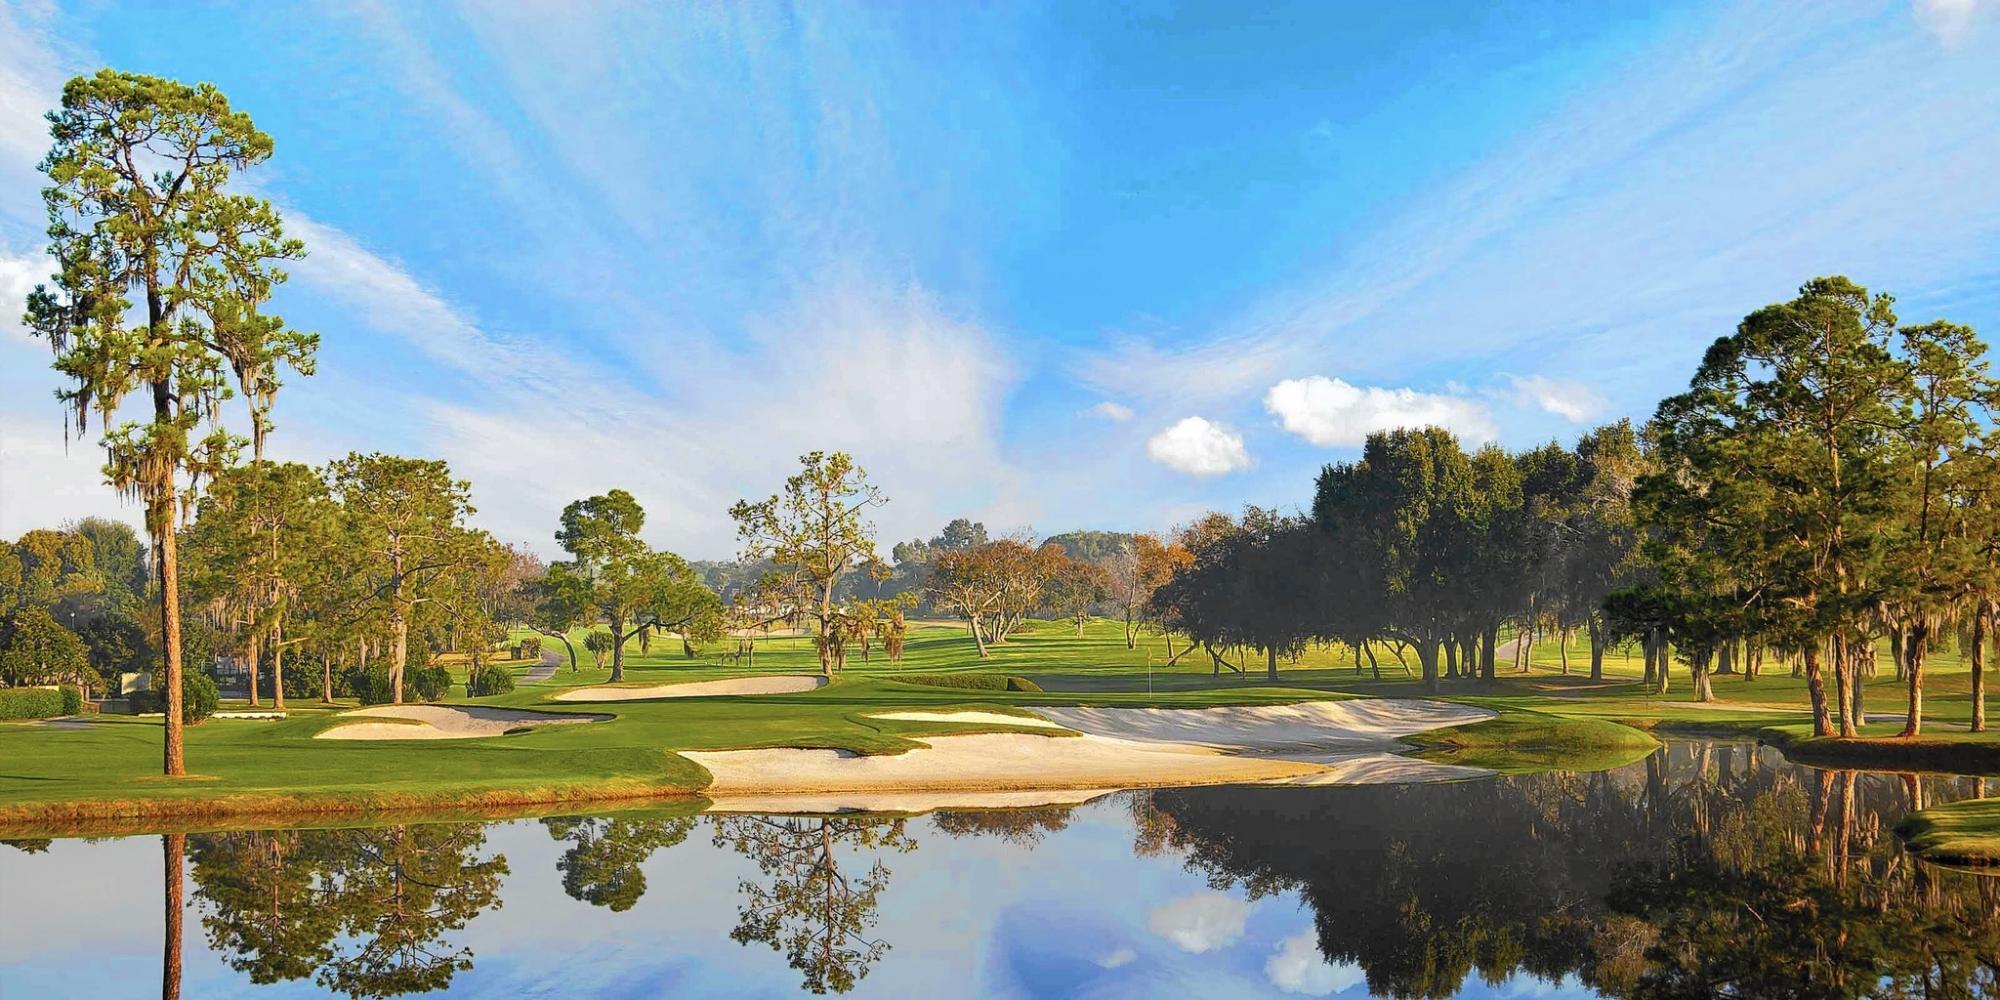 The Bay Hill Golf Club's picturesque golf course situated in incredible Florida.